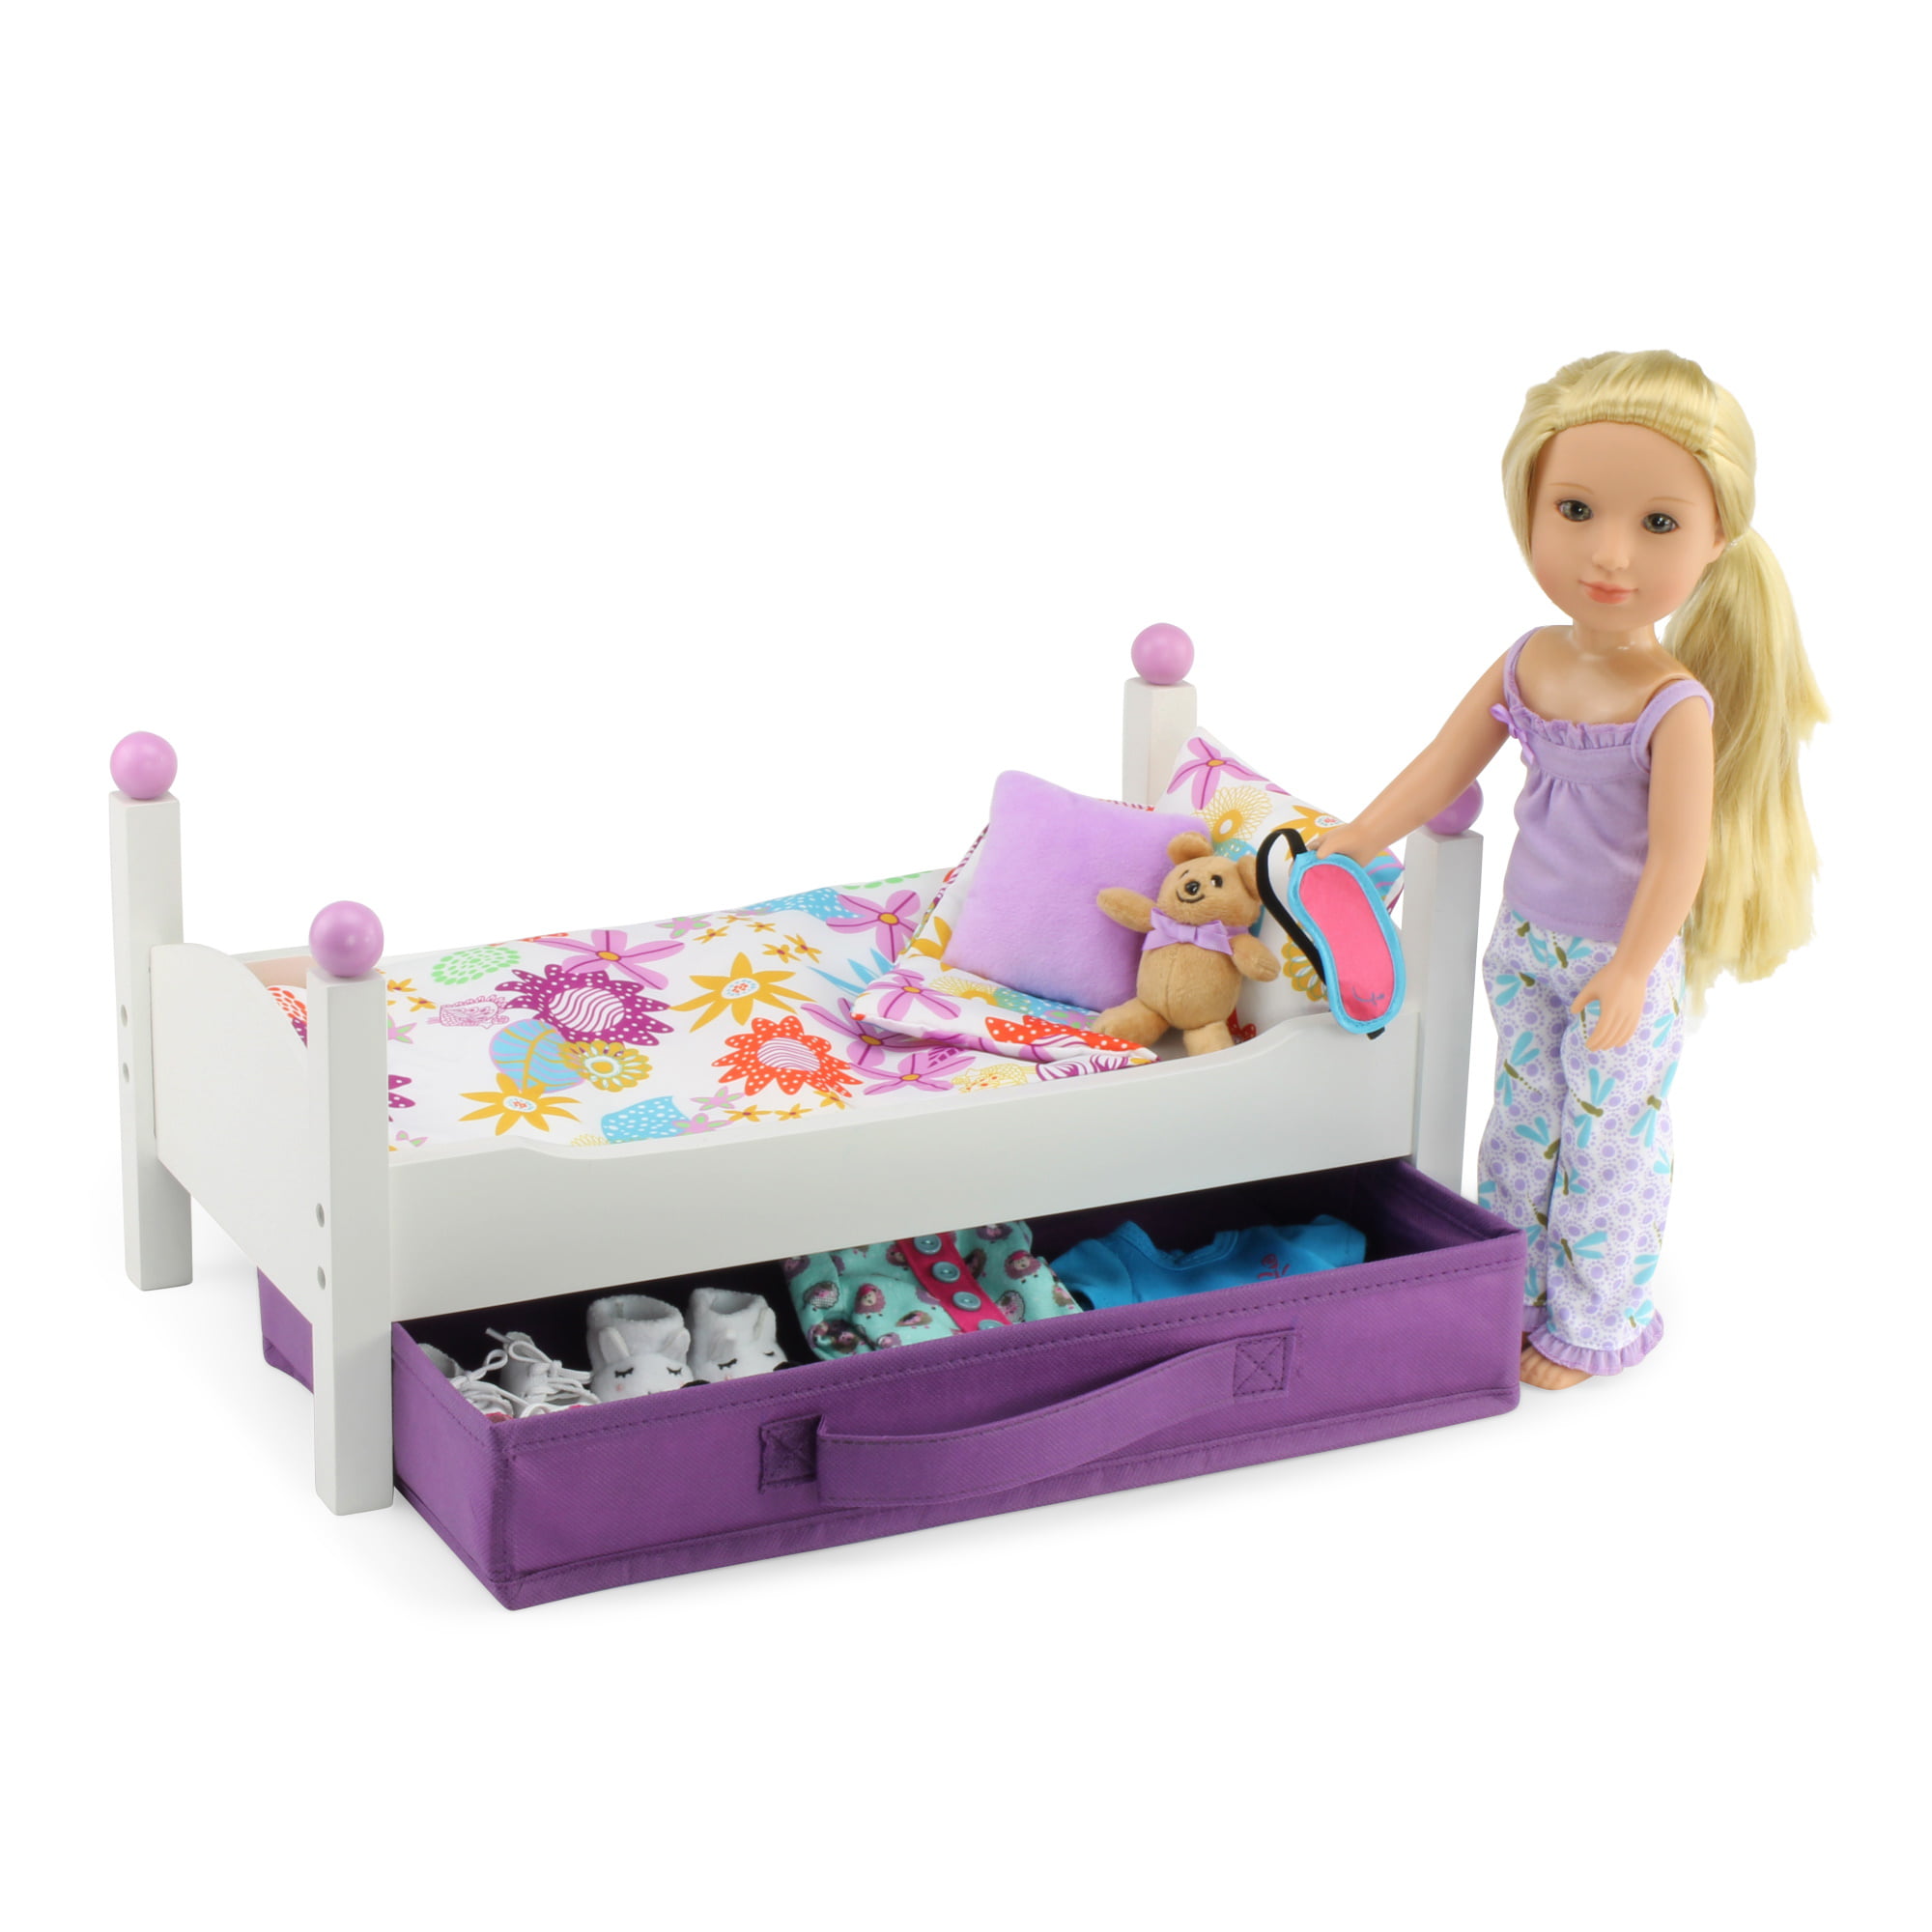 Classic White Single Stackable 14 Doll Bed Emily Rose 14 Inch Doll Bed Fits 14 American Girl Wellie Wishers and Glitter Girls Dolls Includes 1 Set of Colorful 4 Piece Bedding